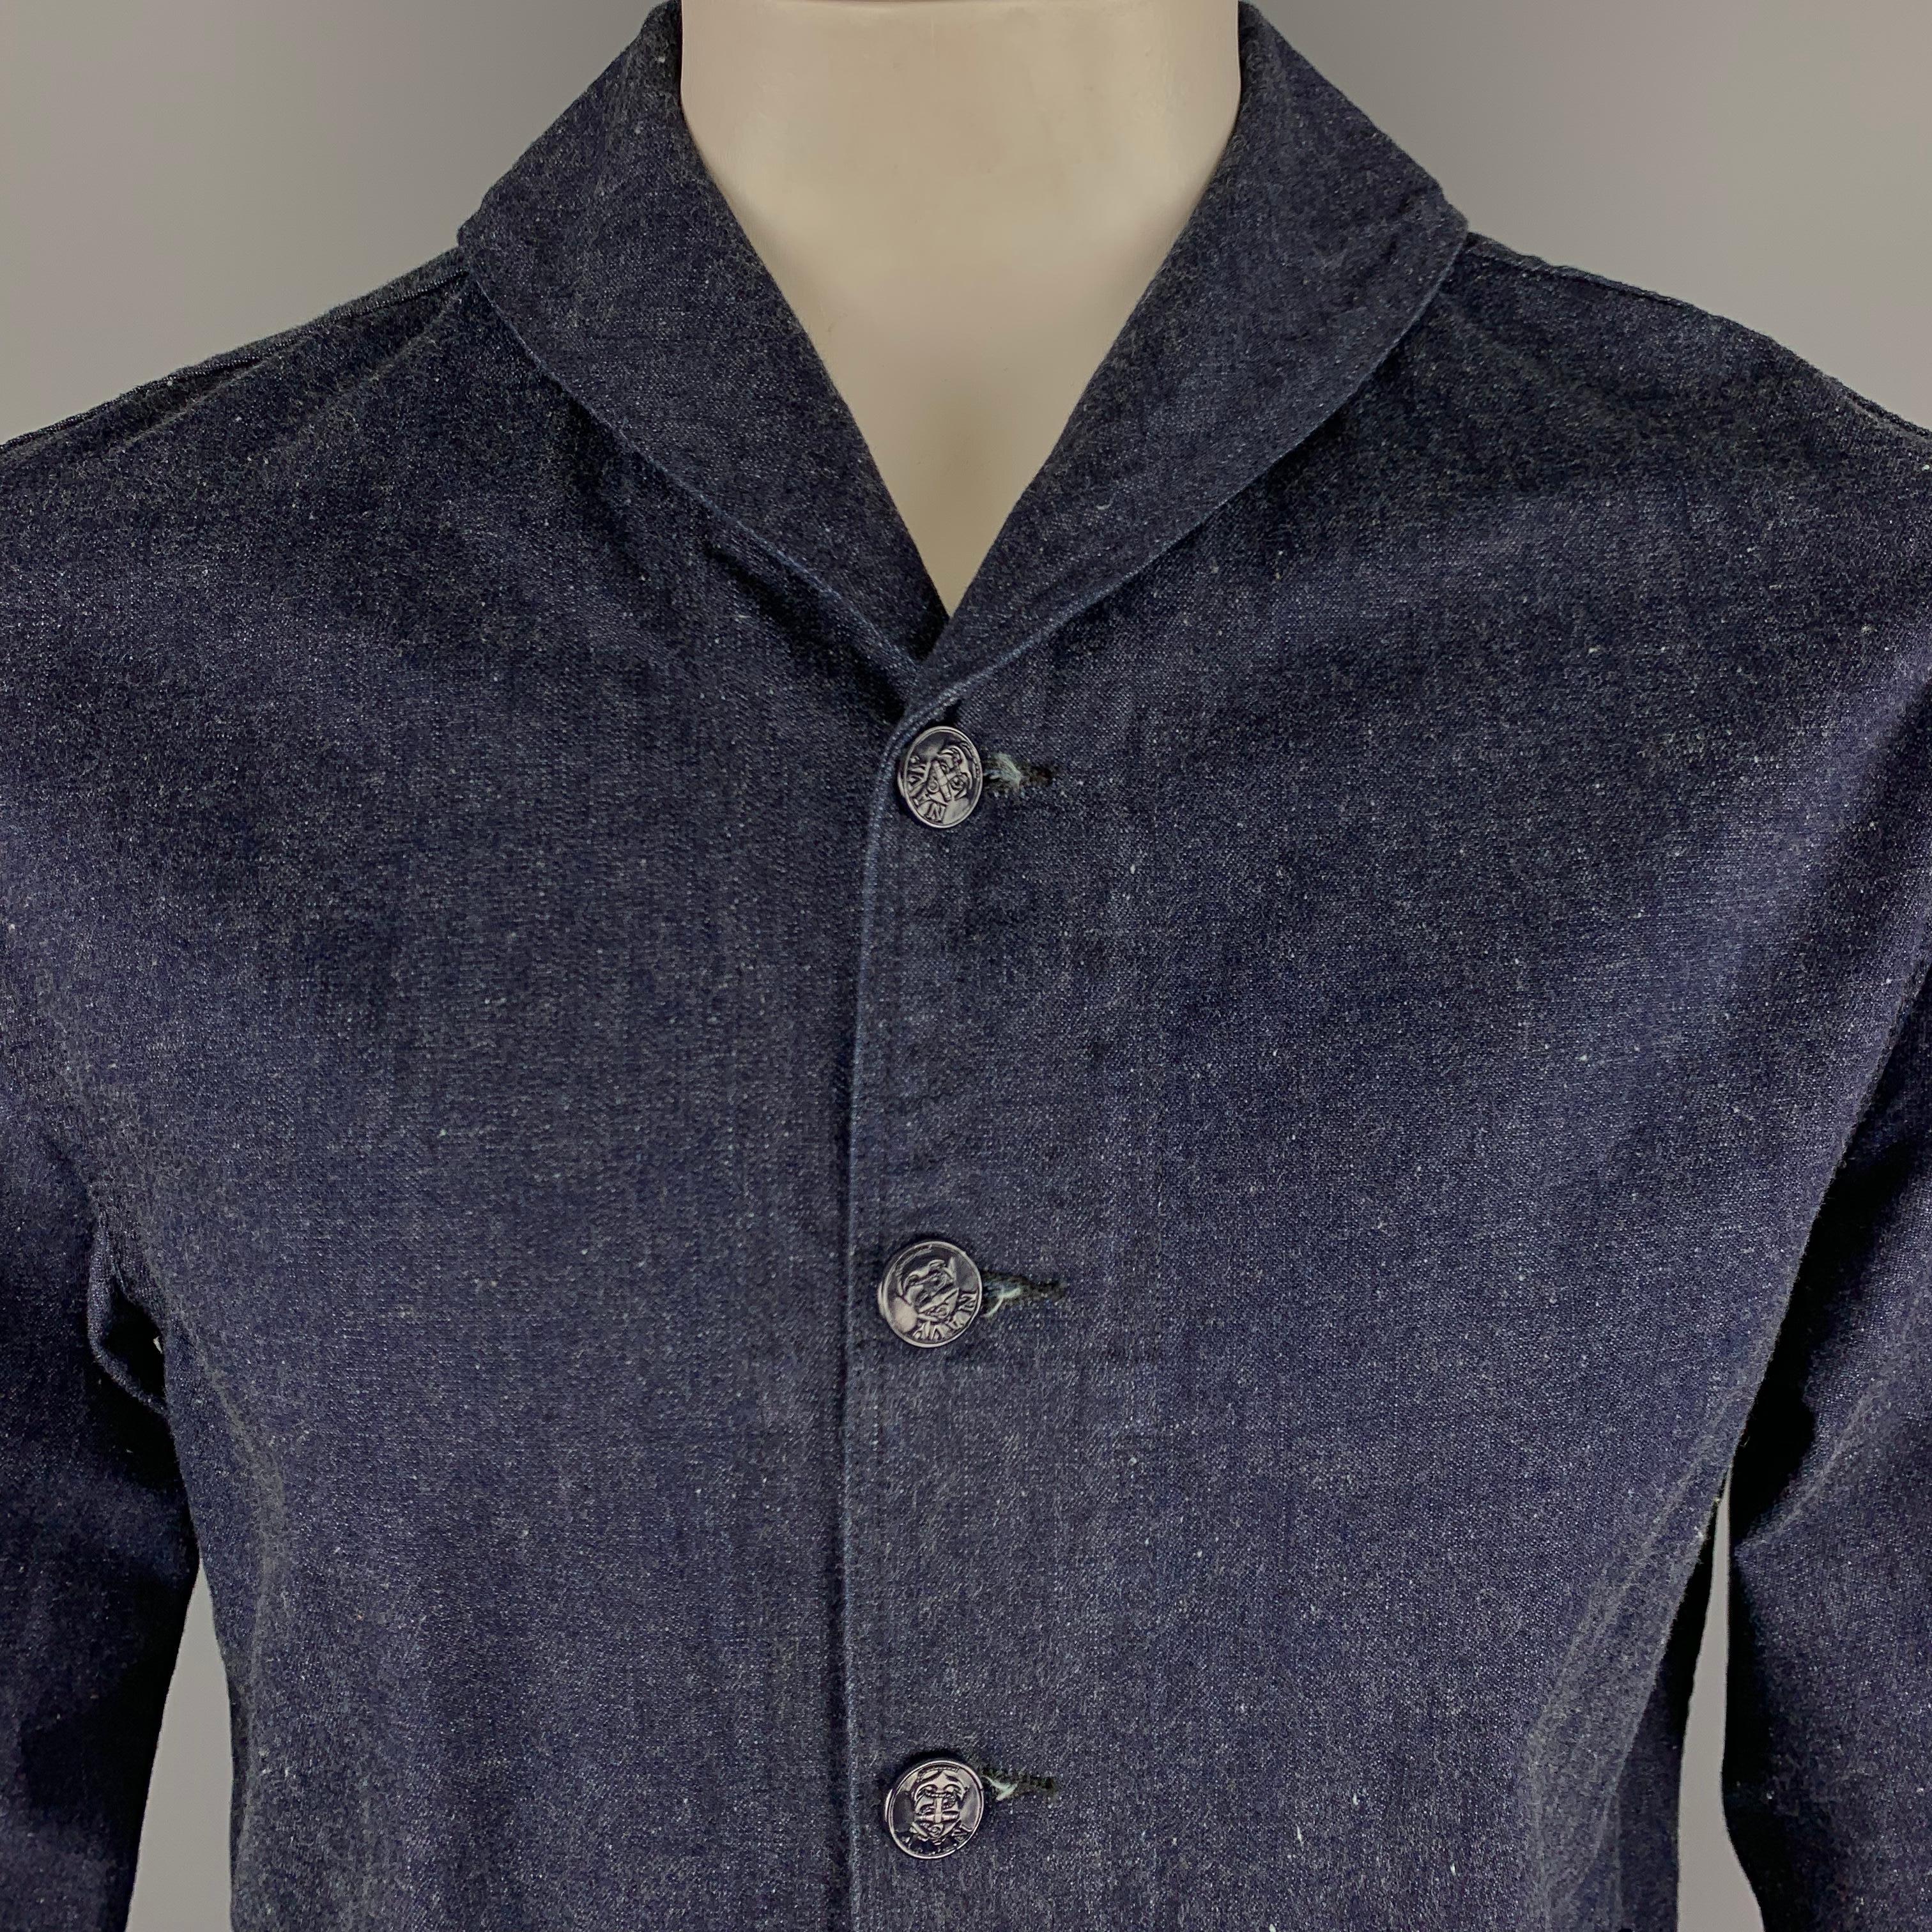 TCB Jeans Jacket comes in an indigo tone in a solid cotton material, with a shawl collar, buttoned front, embossed buttons, patch pockets, unbuttoned cuffs, unlined, in a 